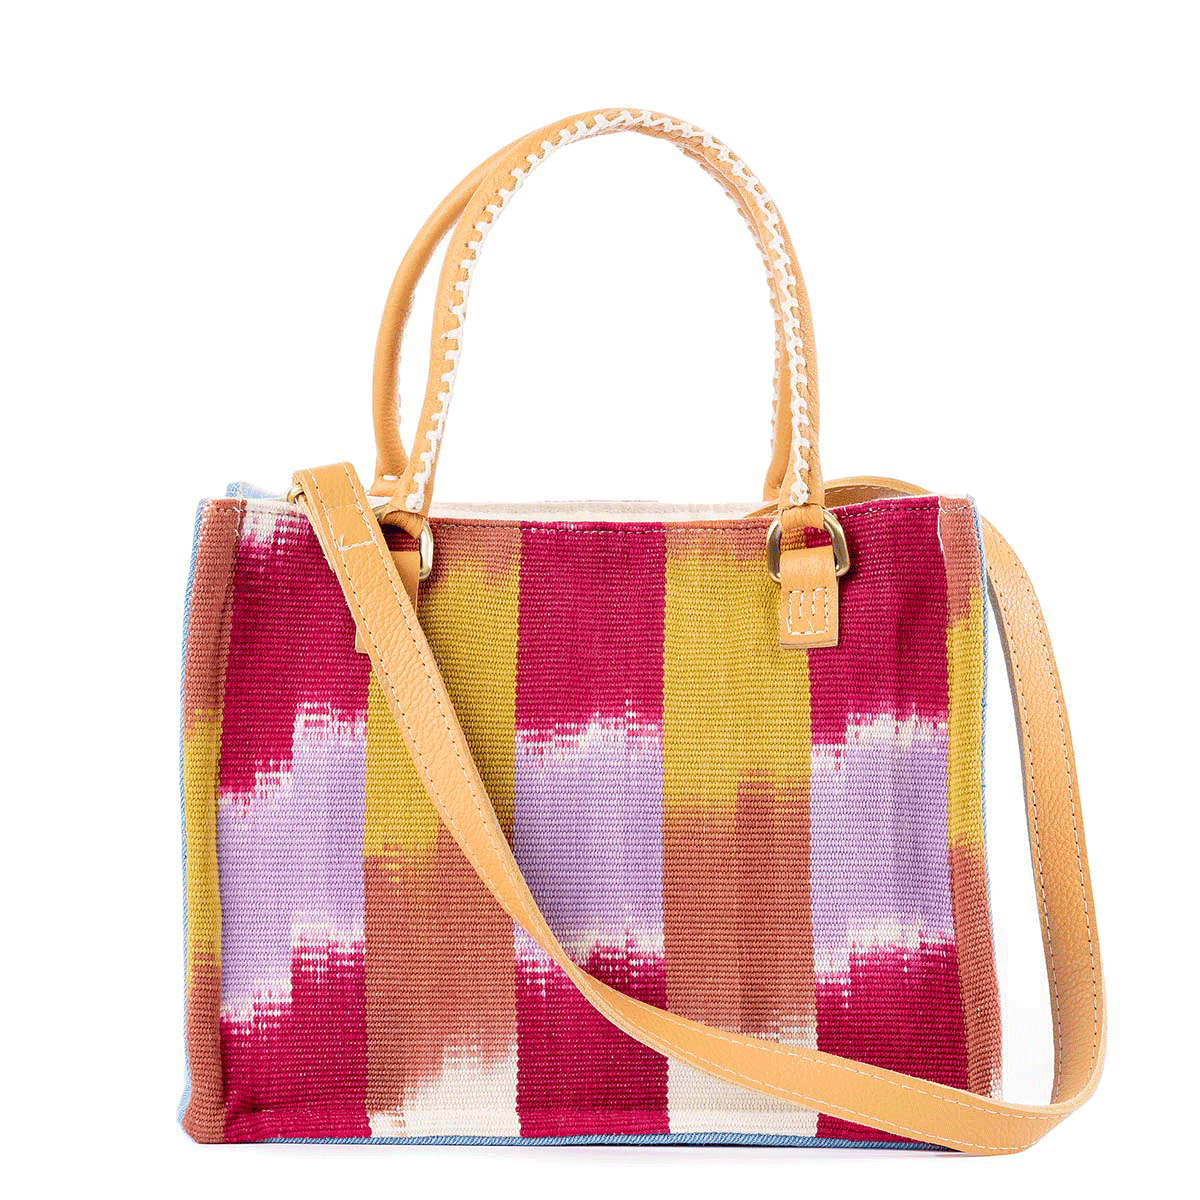 A GIF of the front and back of the hand woven artisan Mini Irma Tote in Raspberry Paleta.